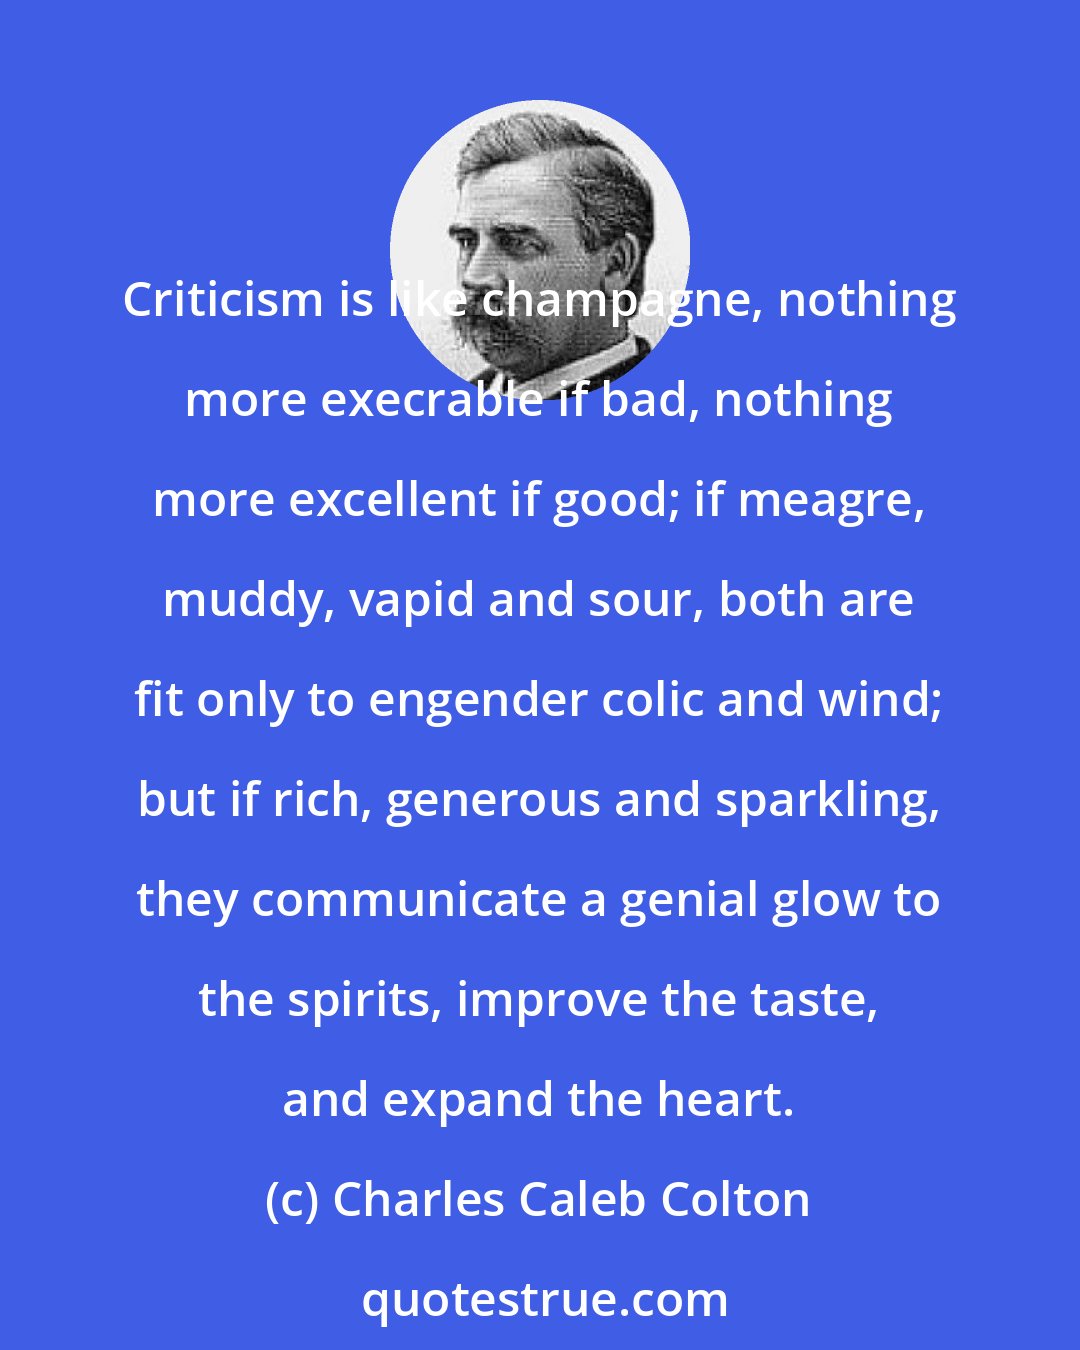 Charles Caleb Colton: Criticism is like champagne, nothing more execrable if bad, nothing more excellent if good; if meagre, muddy, vapid and sour, both are fit only to engender colic and wind; but if rich, generous and sparkling, they communicate a genial glow to the spirits, improve the taste, and expand the heart.